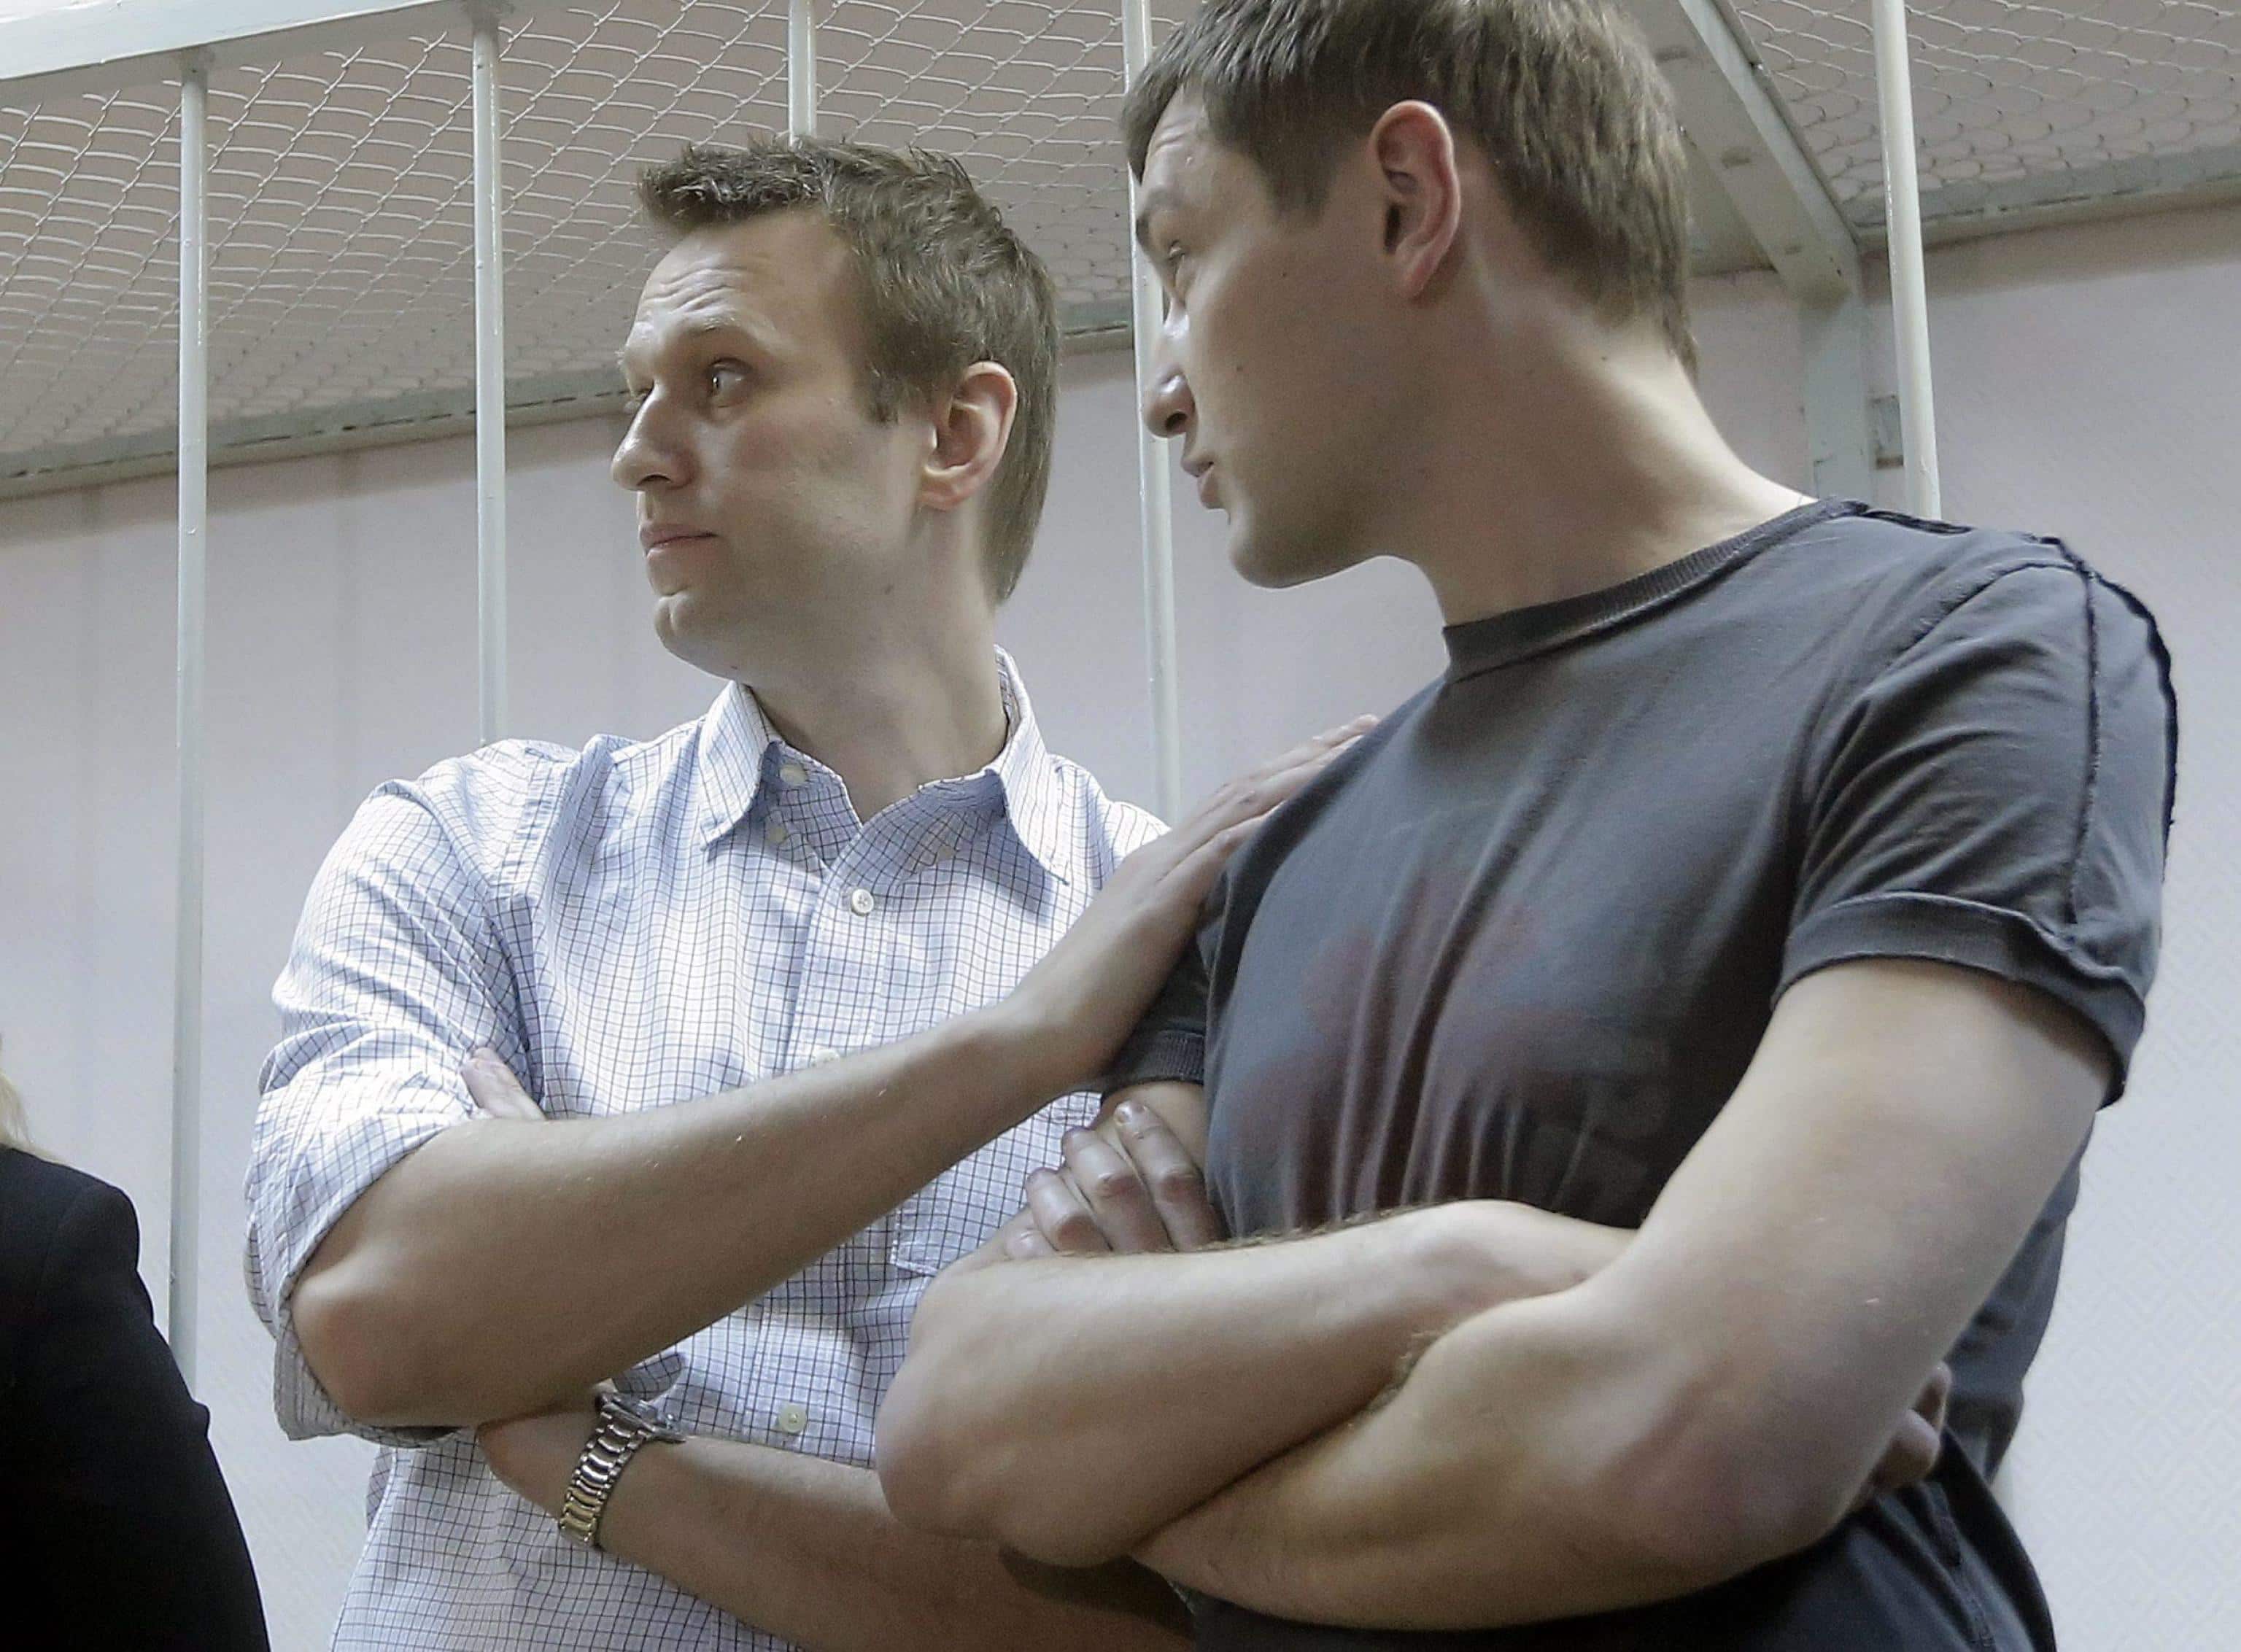 Alexei Navalny (L), famous as an anti-corruption blogger and as liberal opposition leader, stands together with his brother Oleg Navalny (R) after the reading of their verdict at the Zamoskvoretsky district court in Moscow, Russia, 30 December 2014. ANSA/MAXIM SHIPENKOV